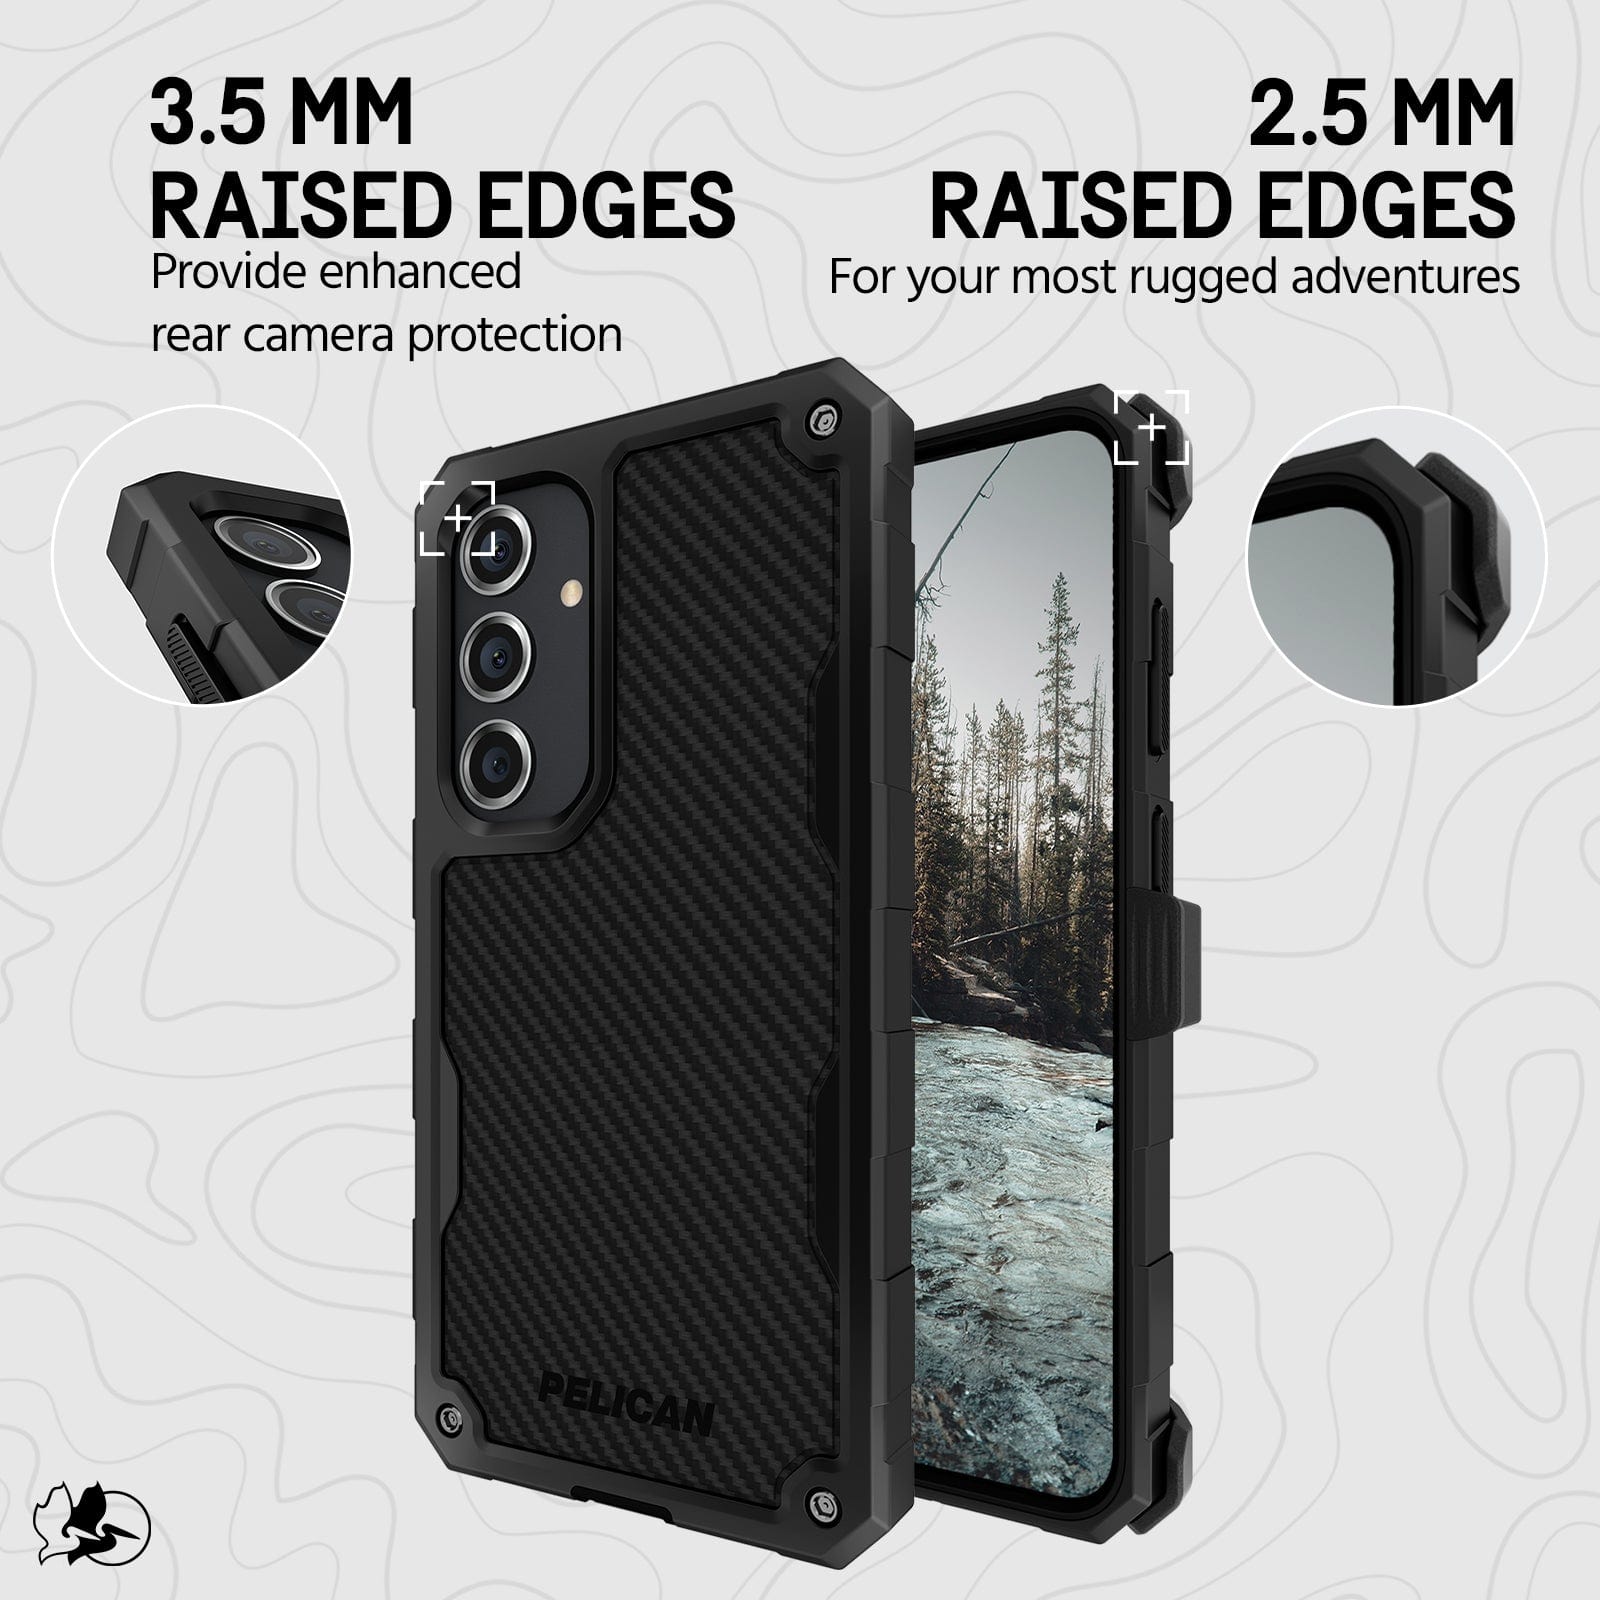 3.5MM RAISED EDGED PROVIDE ENHANCED REAR CAMERA PROTECTION. 2.5MM RAISED EDGES FOR YOUR MOST RUGGED ADVENTURES